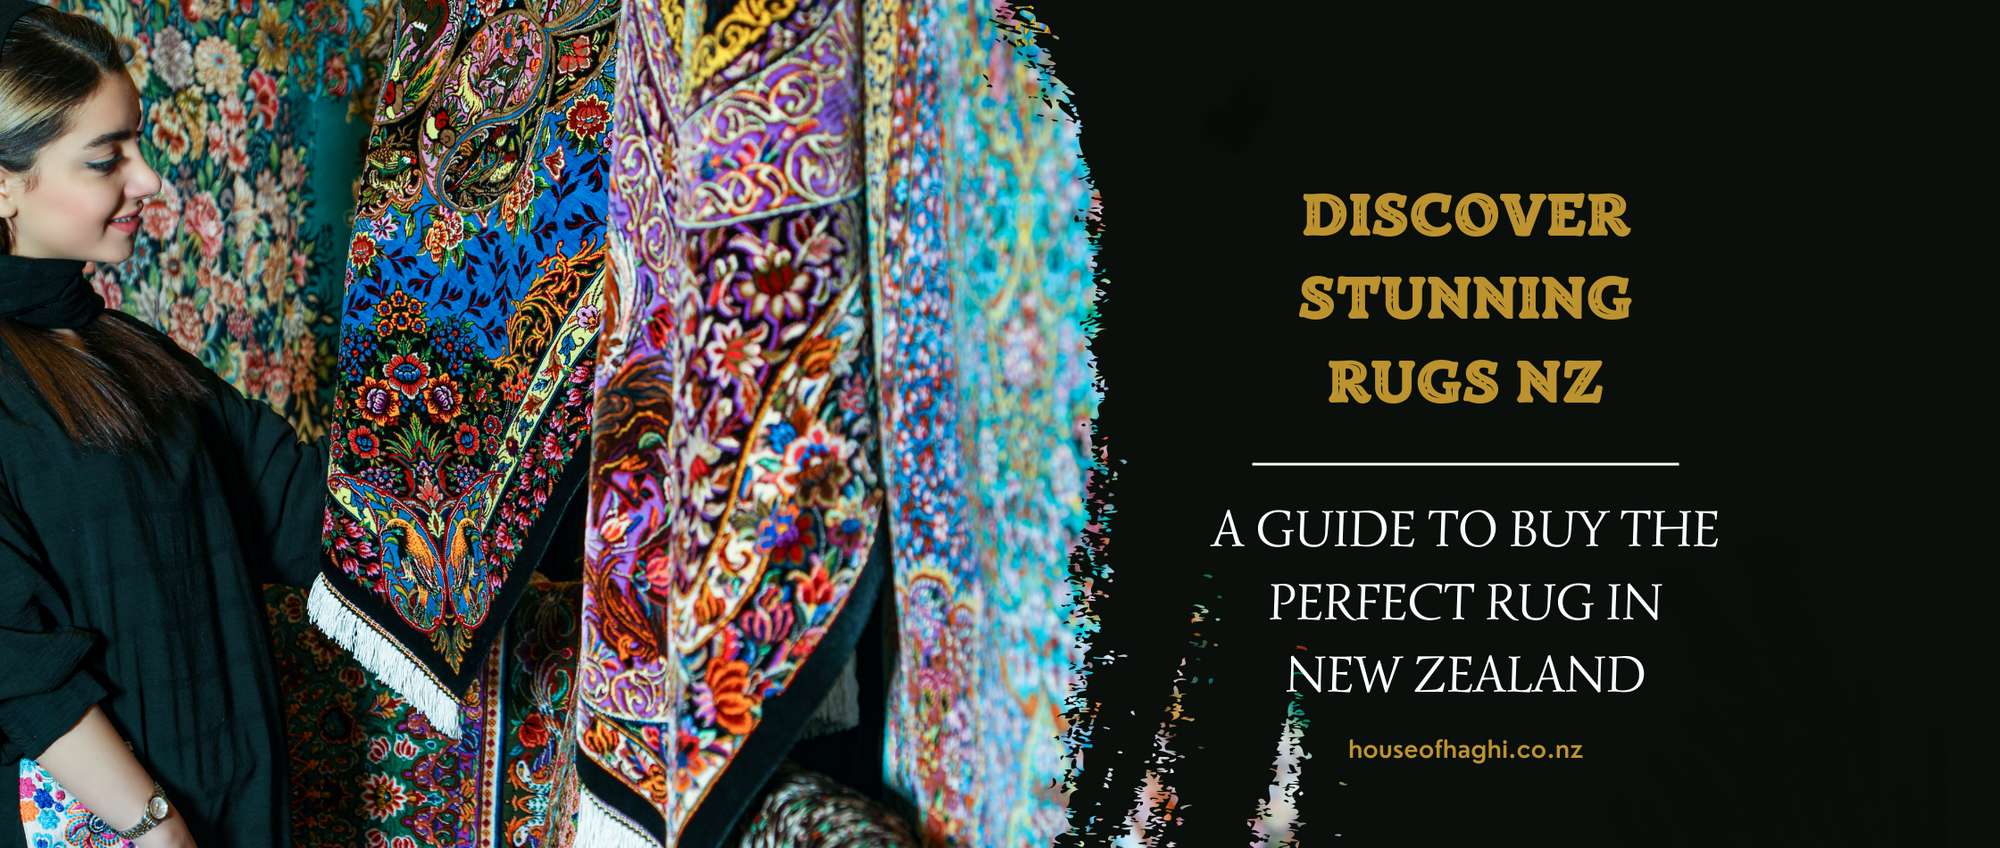 Discover Stunning Rugs NZ: A Guide to Buy the Perfect Rug in New Zealand